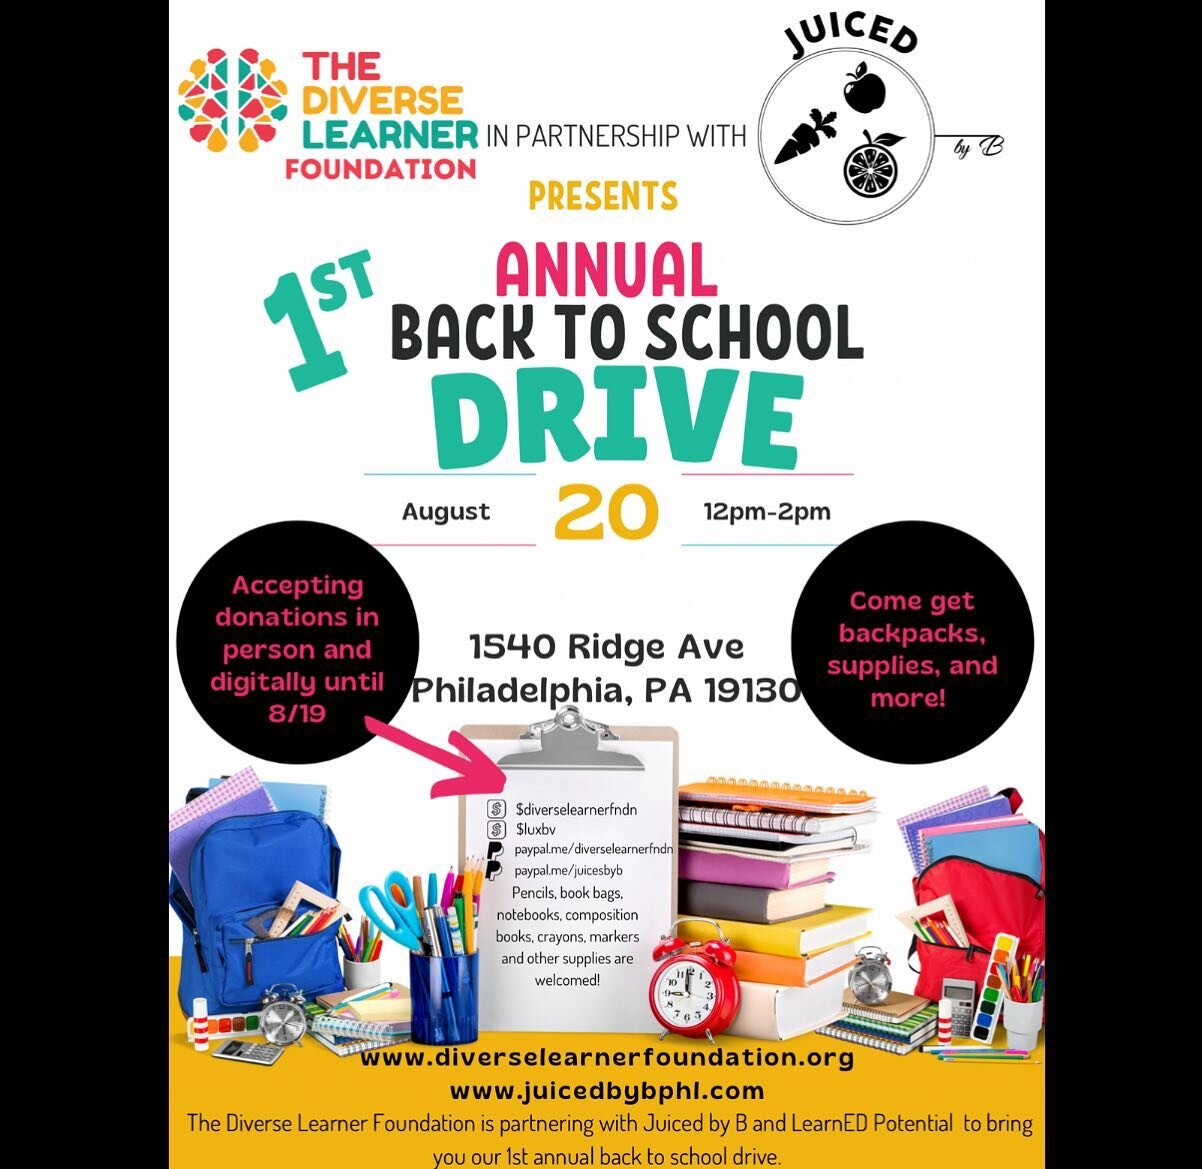 Hey Potential Peeps! We are excited to announce our 1st annual back to school to drive in partnership with @diverselearnerfoundation and @juicedbyb . We are looking forward to the opportunity to give back to our communities in Philly and Trenton. On 